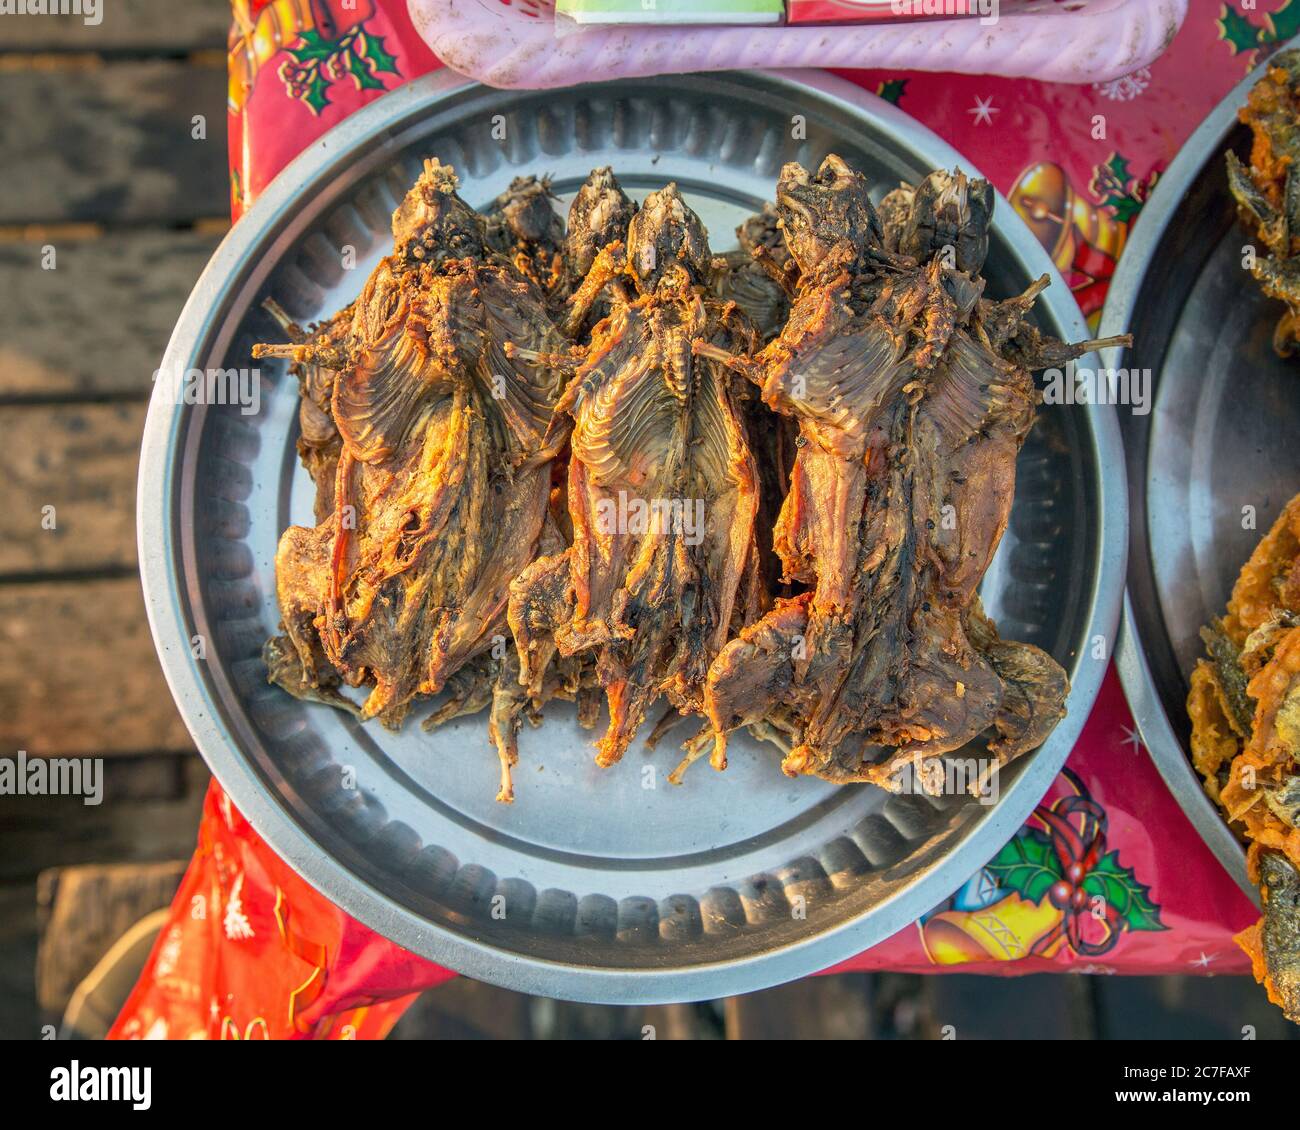 Close-up detail of fried rats for sale at a street market in Mandalay, Myanmar Stock Photo